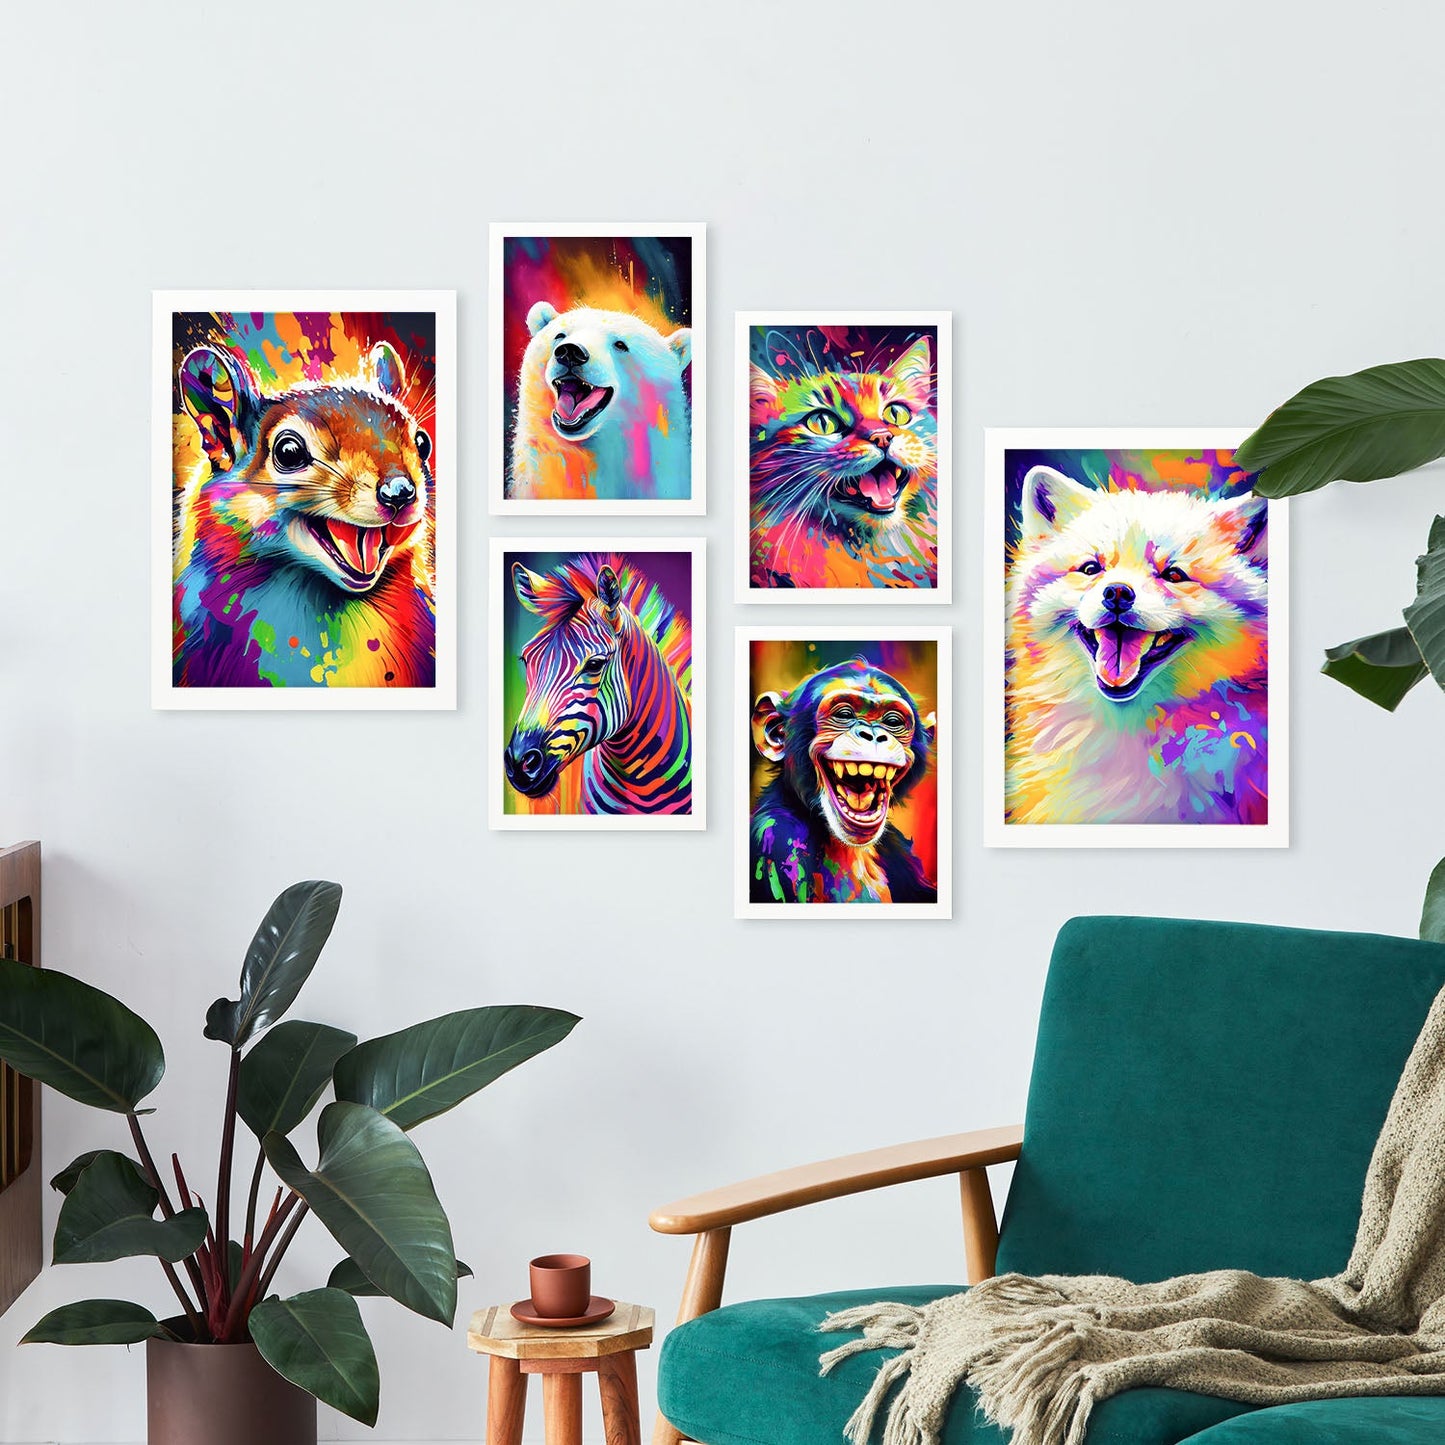 Nacnic Abstract Animal Set_1. Aesthetic Wall Art Prints for Bedroom or Living Room Design.